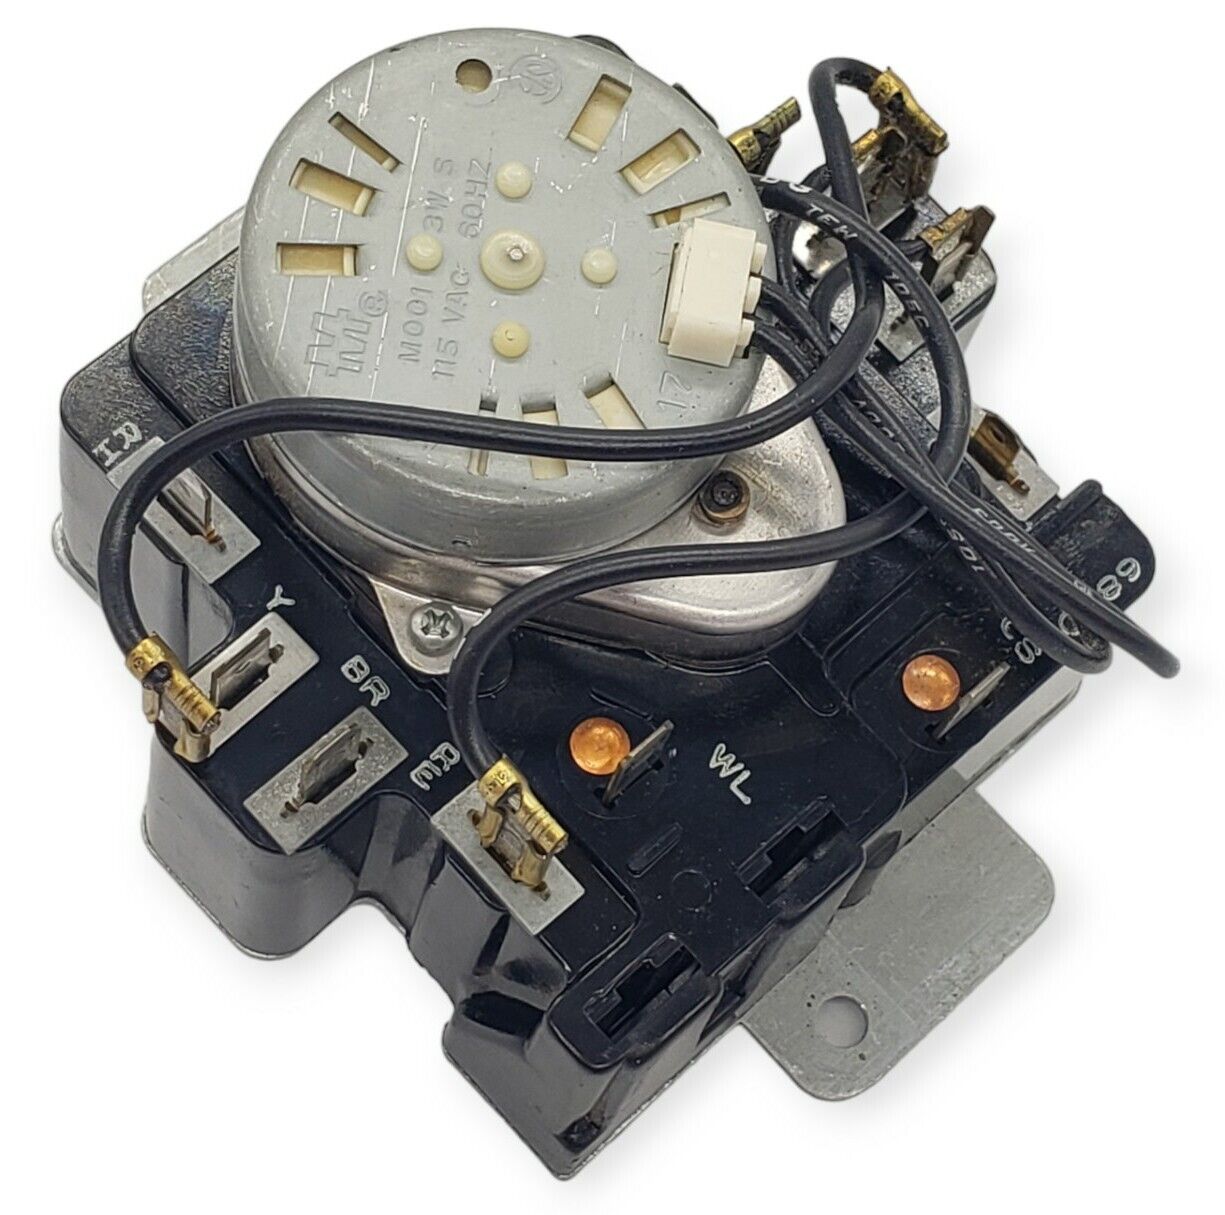 Genuine OEM Replacement for Kenmore Dryer Timer 696890